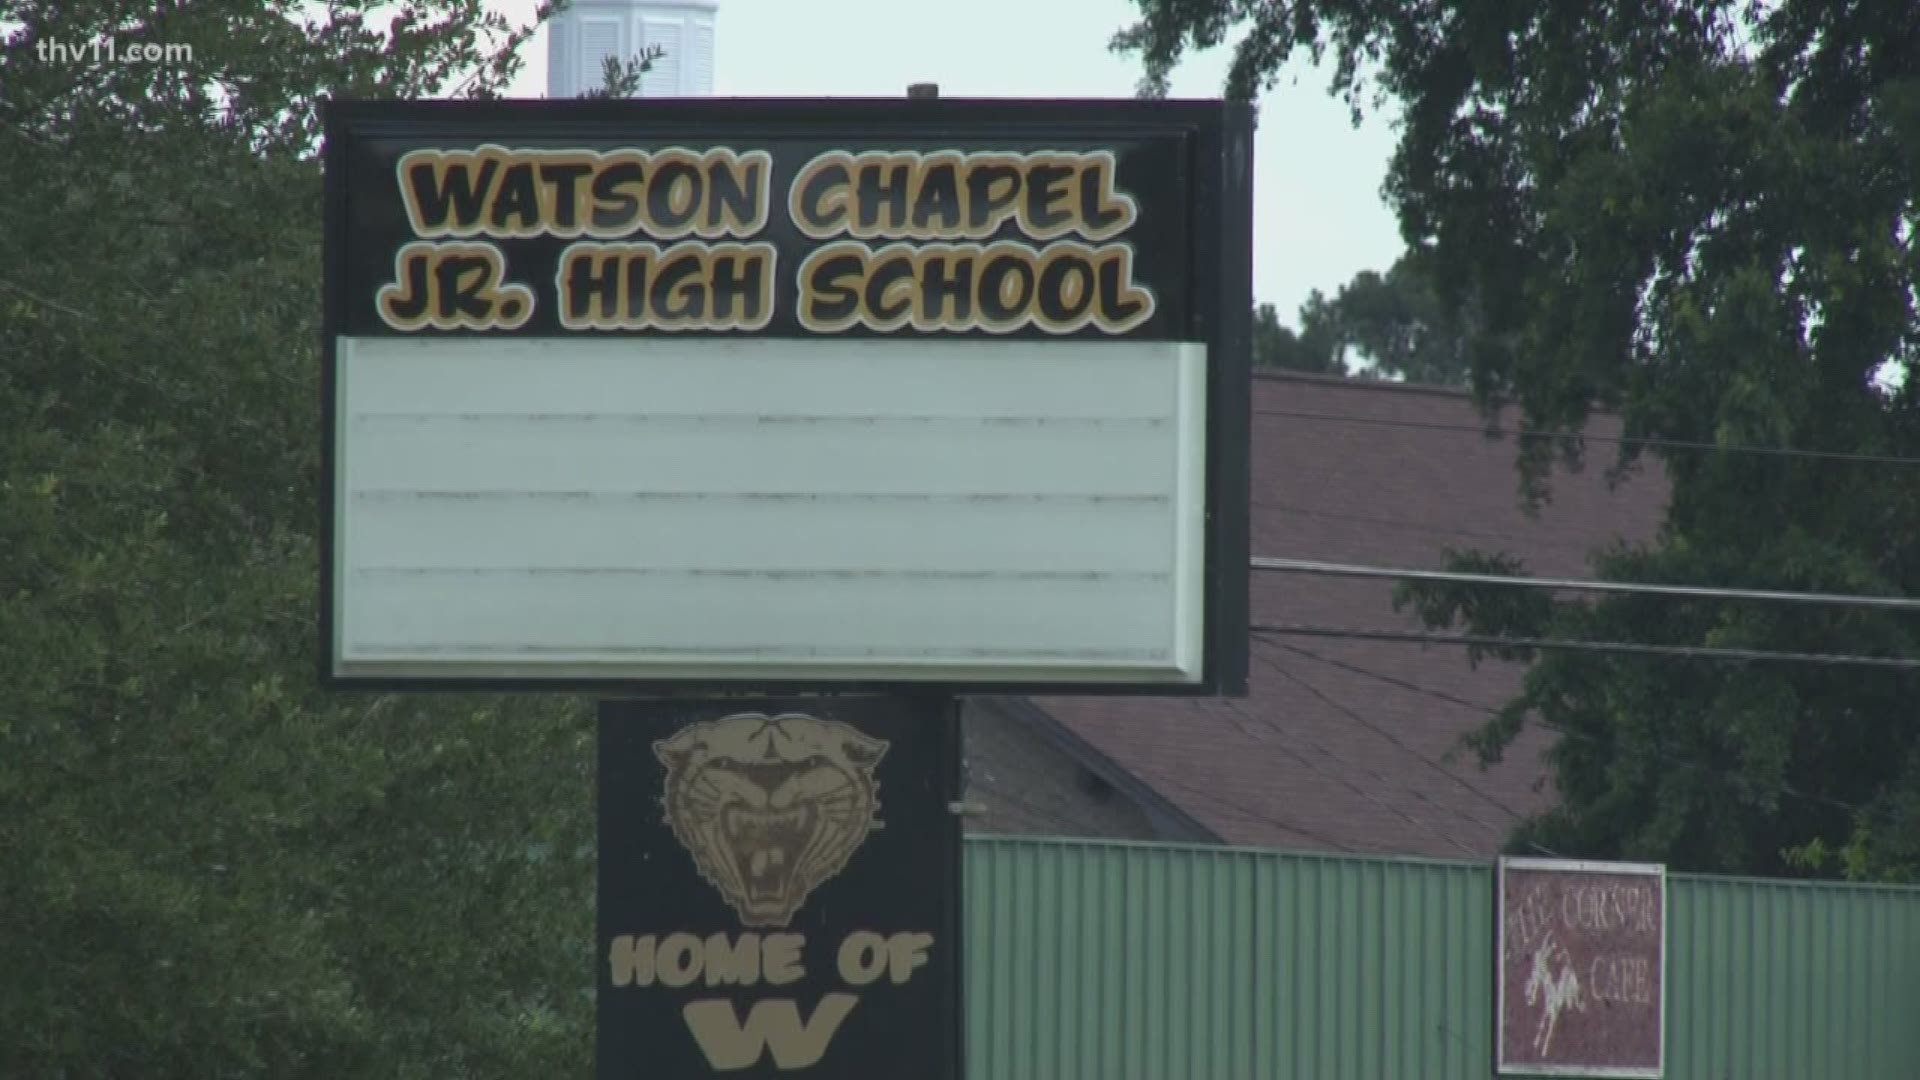 There are three school districts within the city of Pine Bluff, and two of them are currently under state control because their problems were so serious.